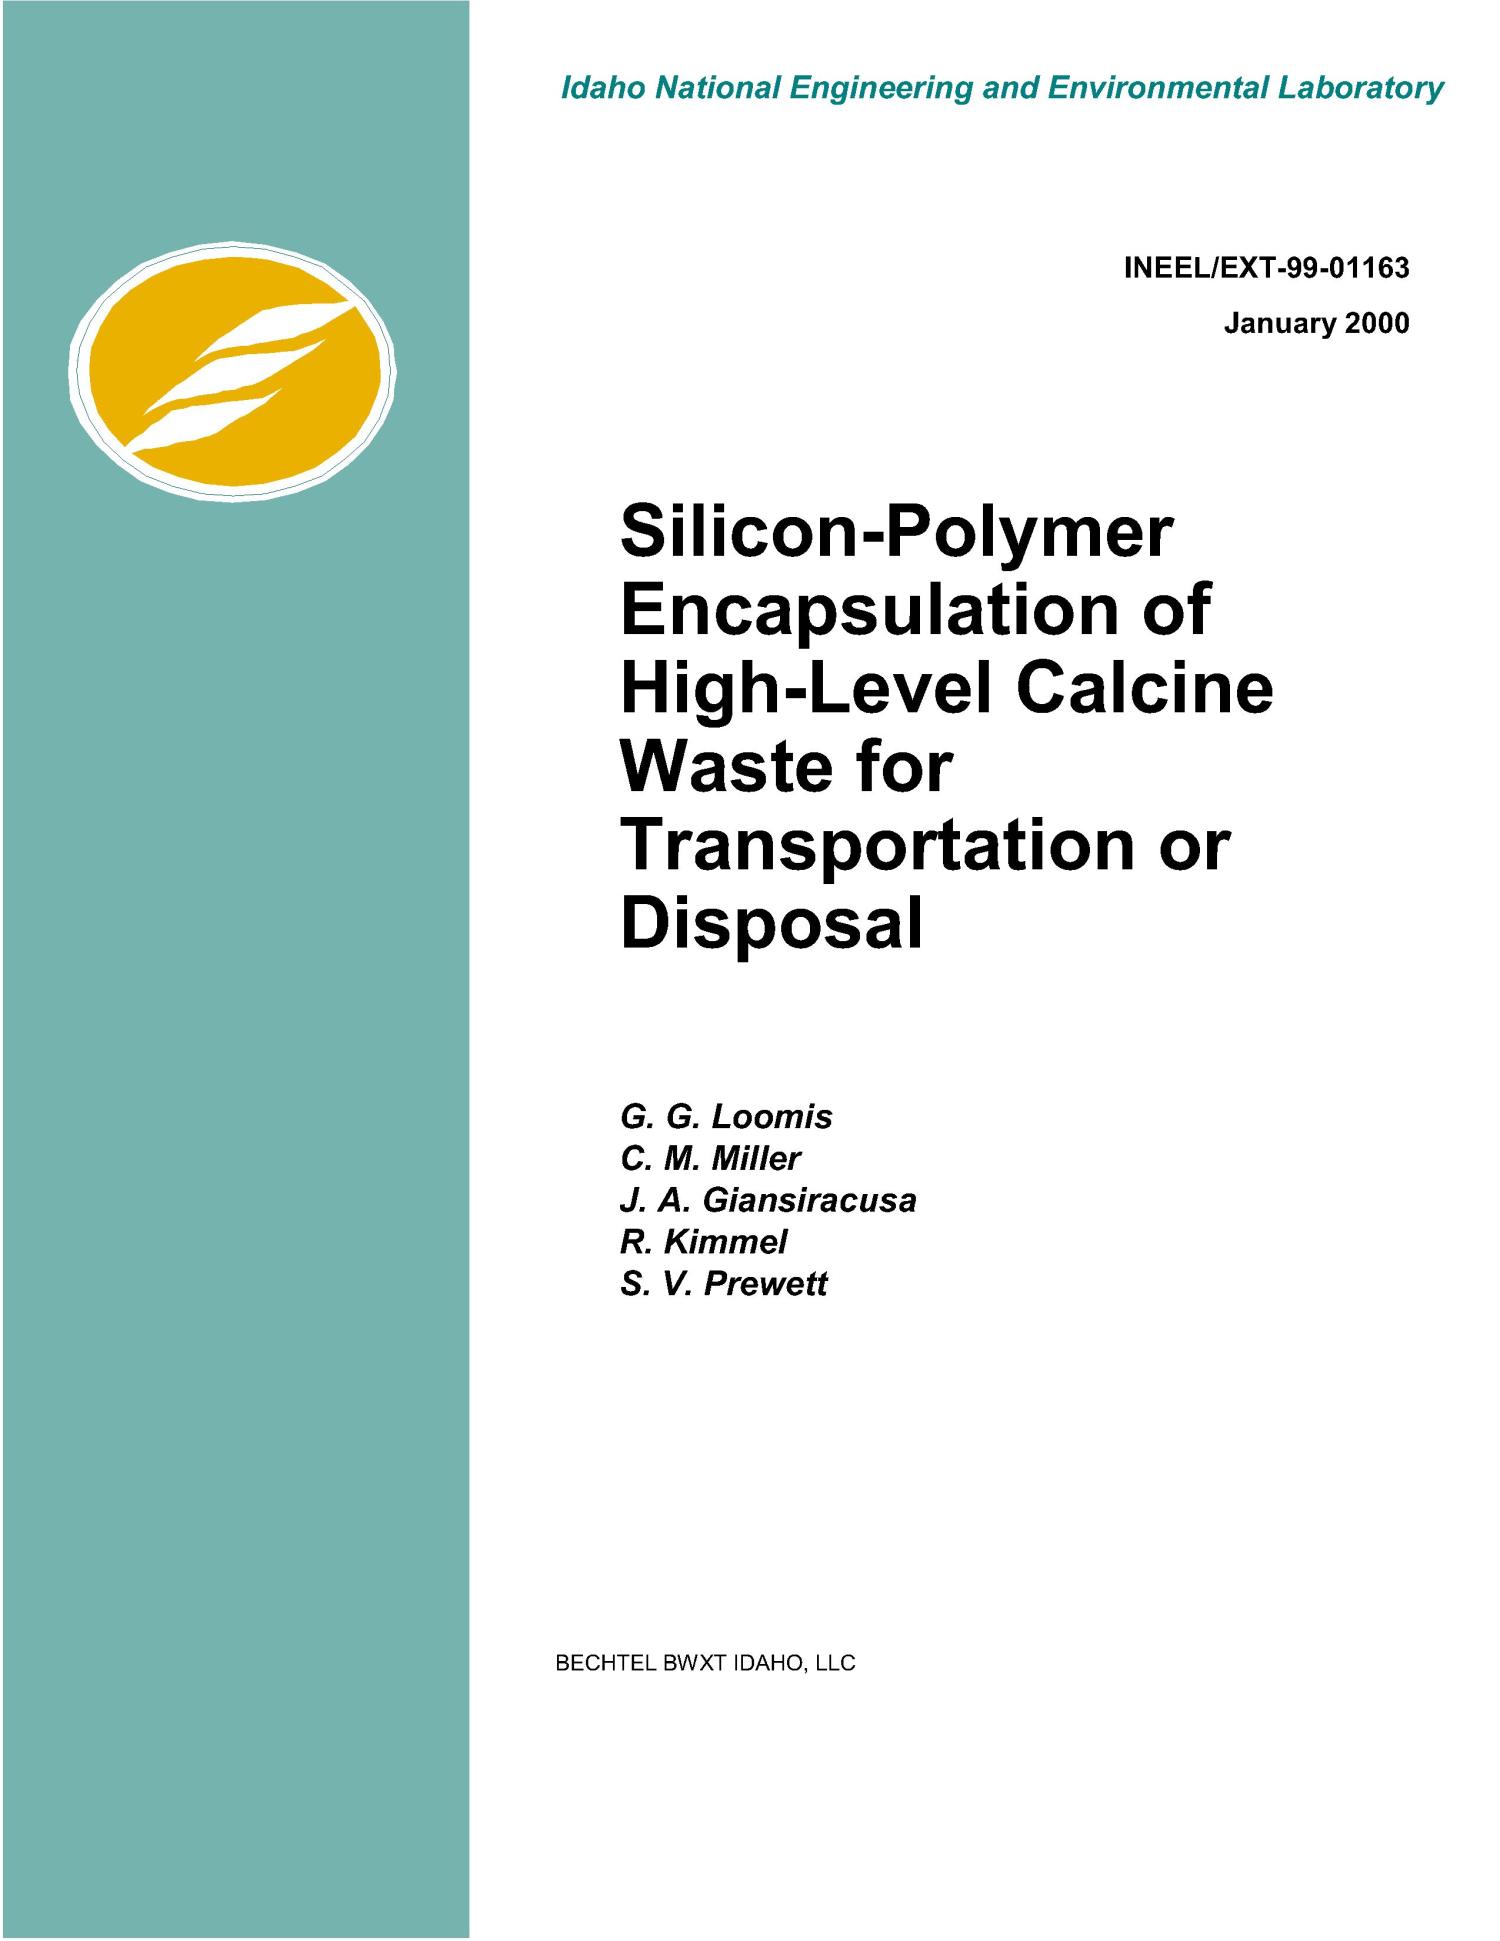 Polysiloxane Encapsulation of High Level Calcine Waste for Transportation or Disposal
                                                
                                                    [Sequence #]: 1 of 33
                                                